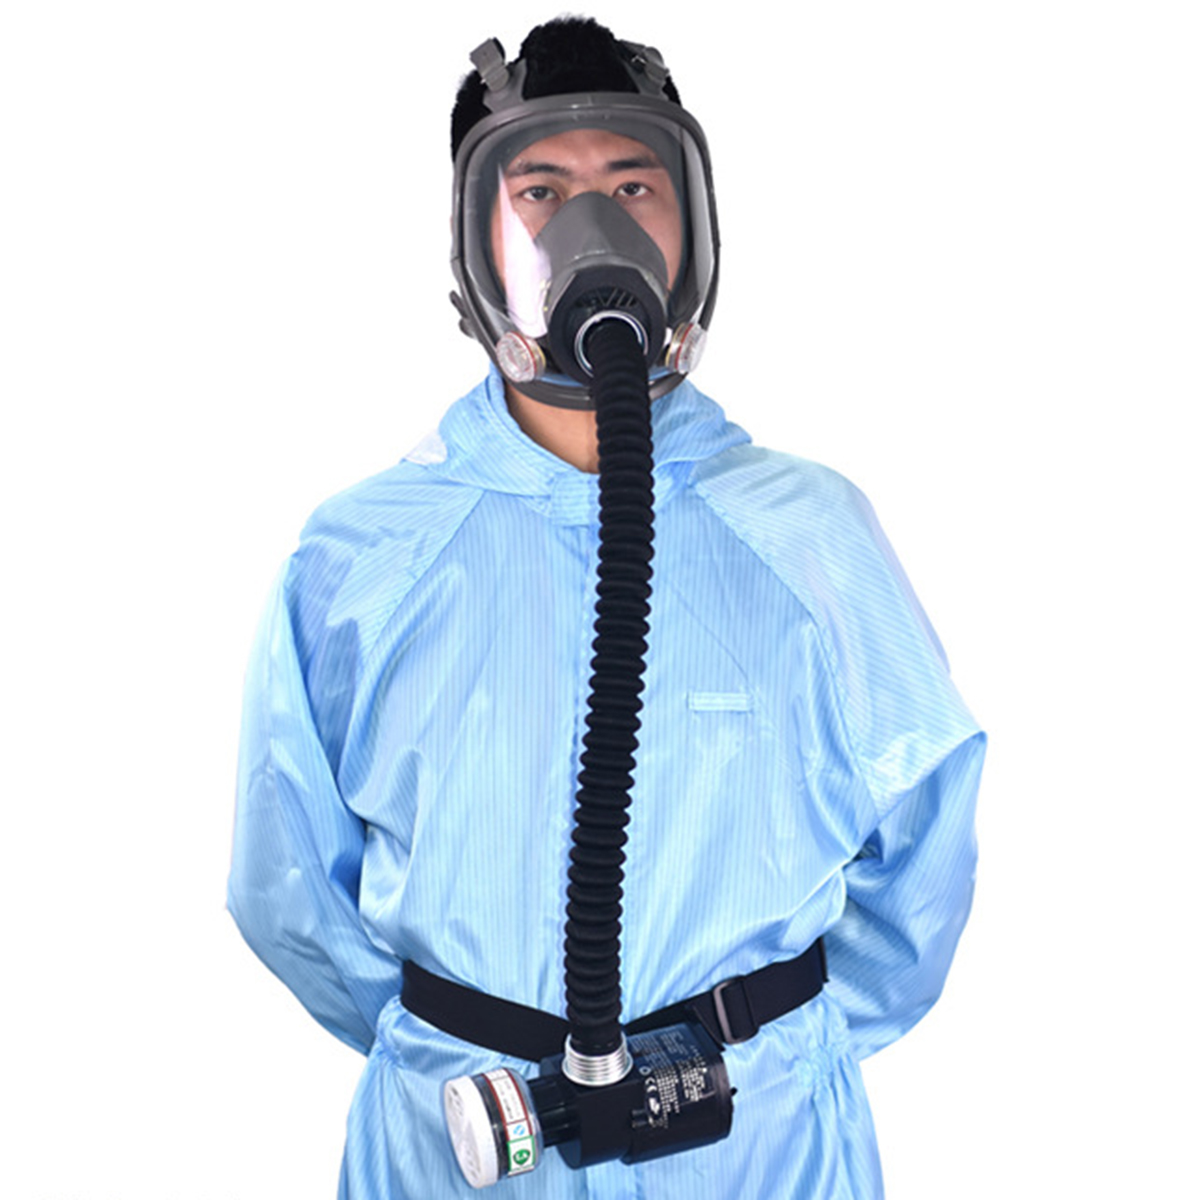 Electric-Constant-Flow-Supplied-Air-Fed-Full-Face-Gas-Mask-Spray-Painting-Tool-Respirator-System-1326170-1